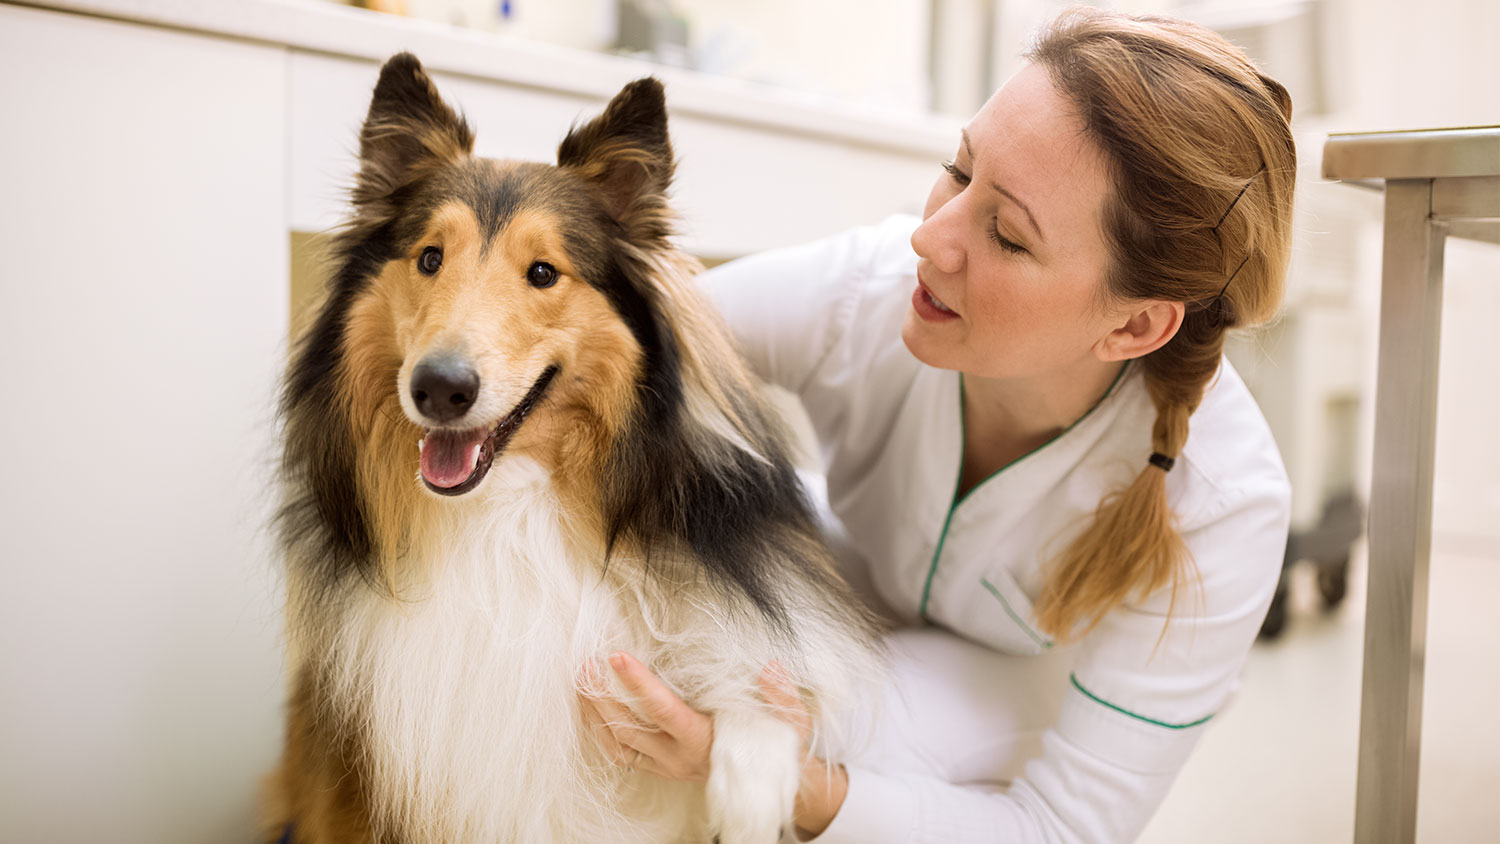 How to Find the Best Vet Near Me